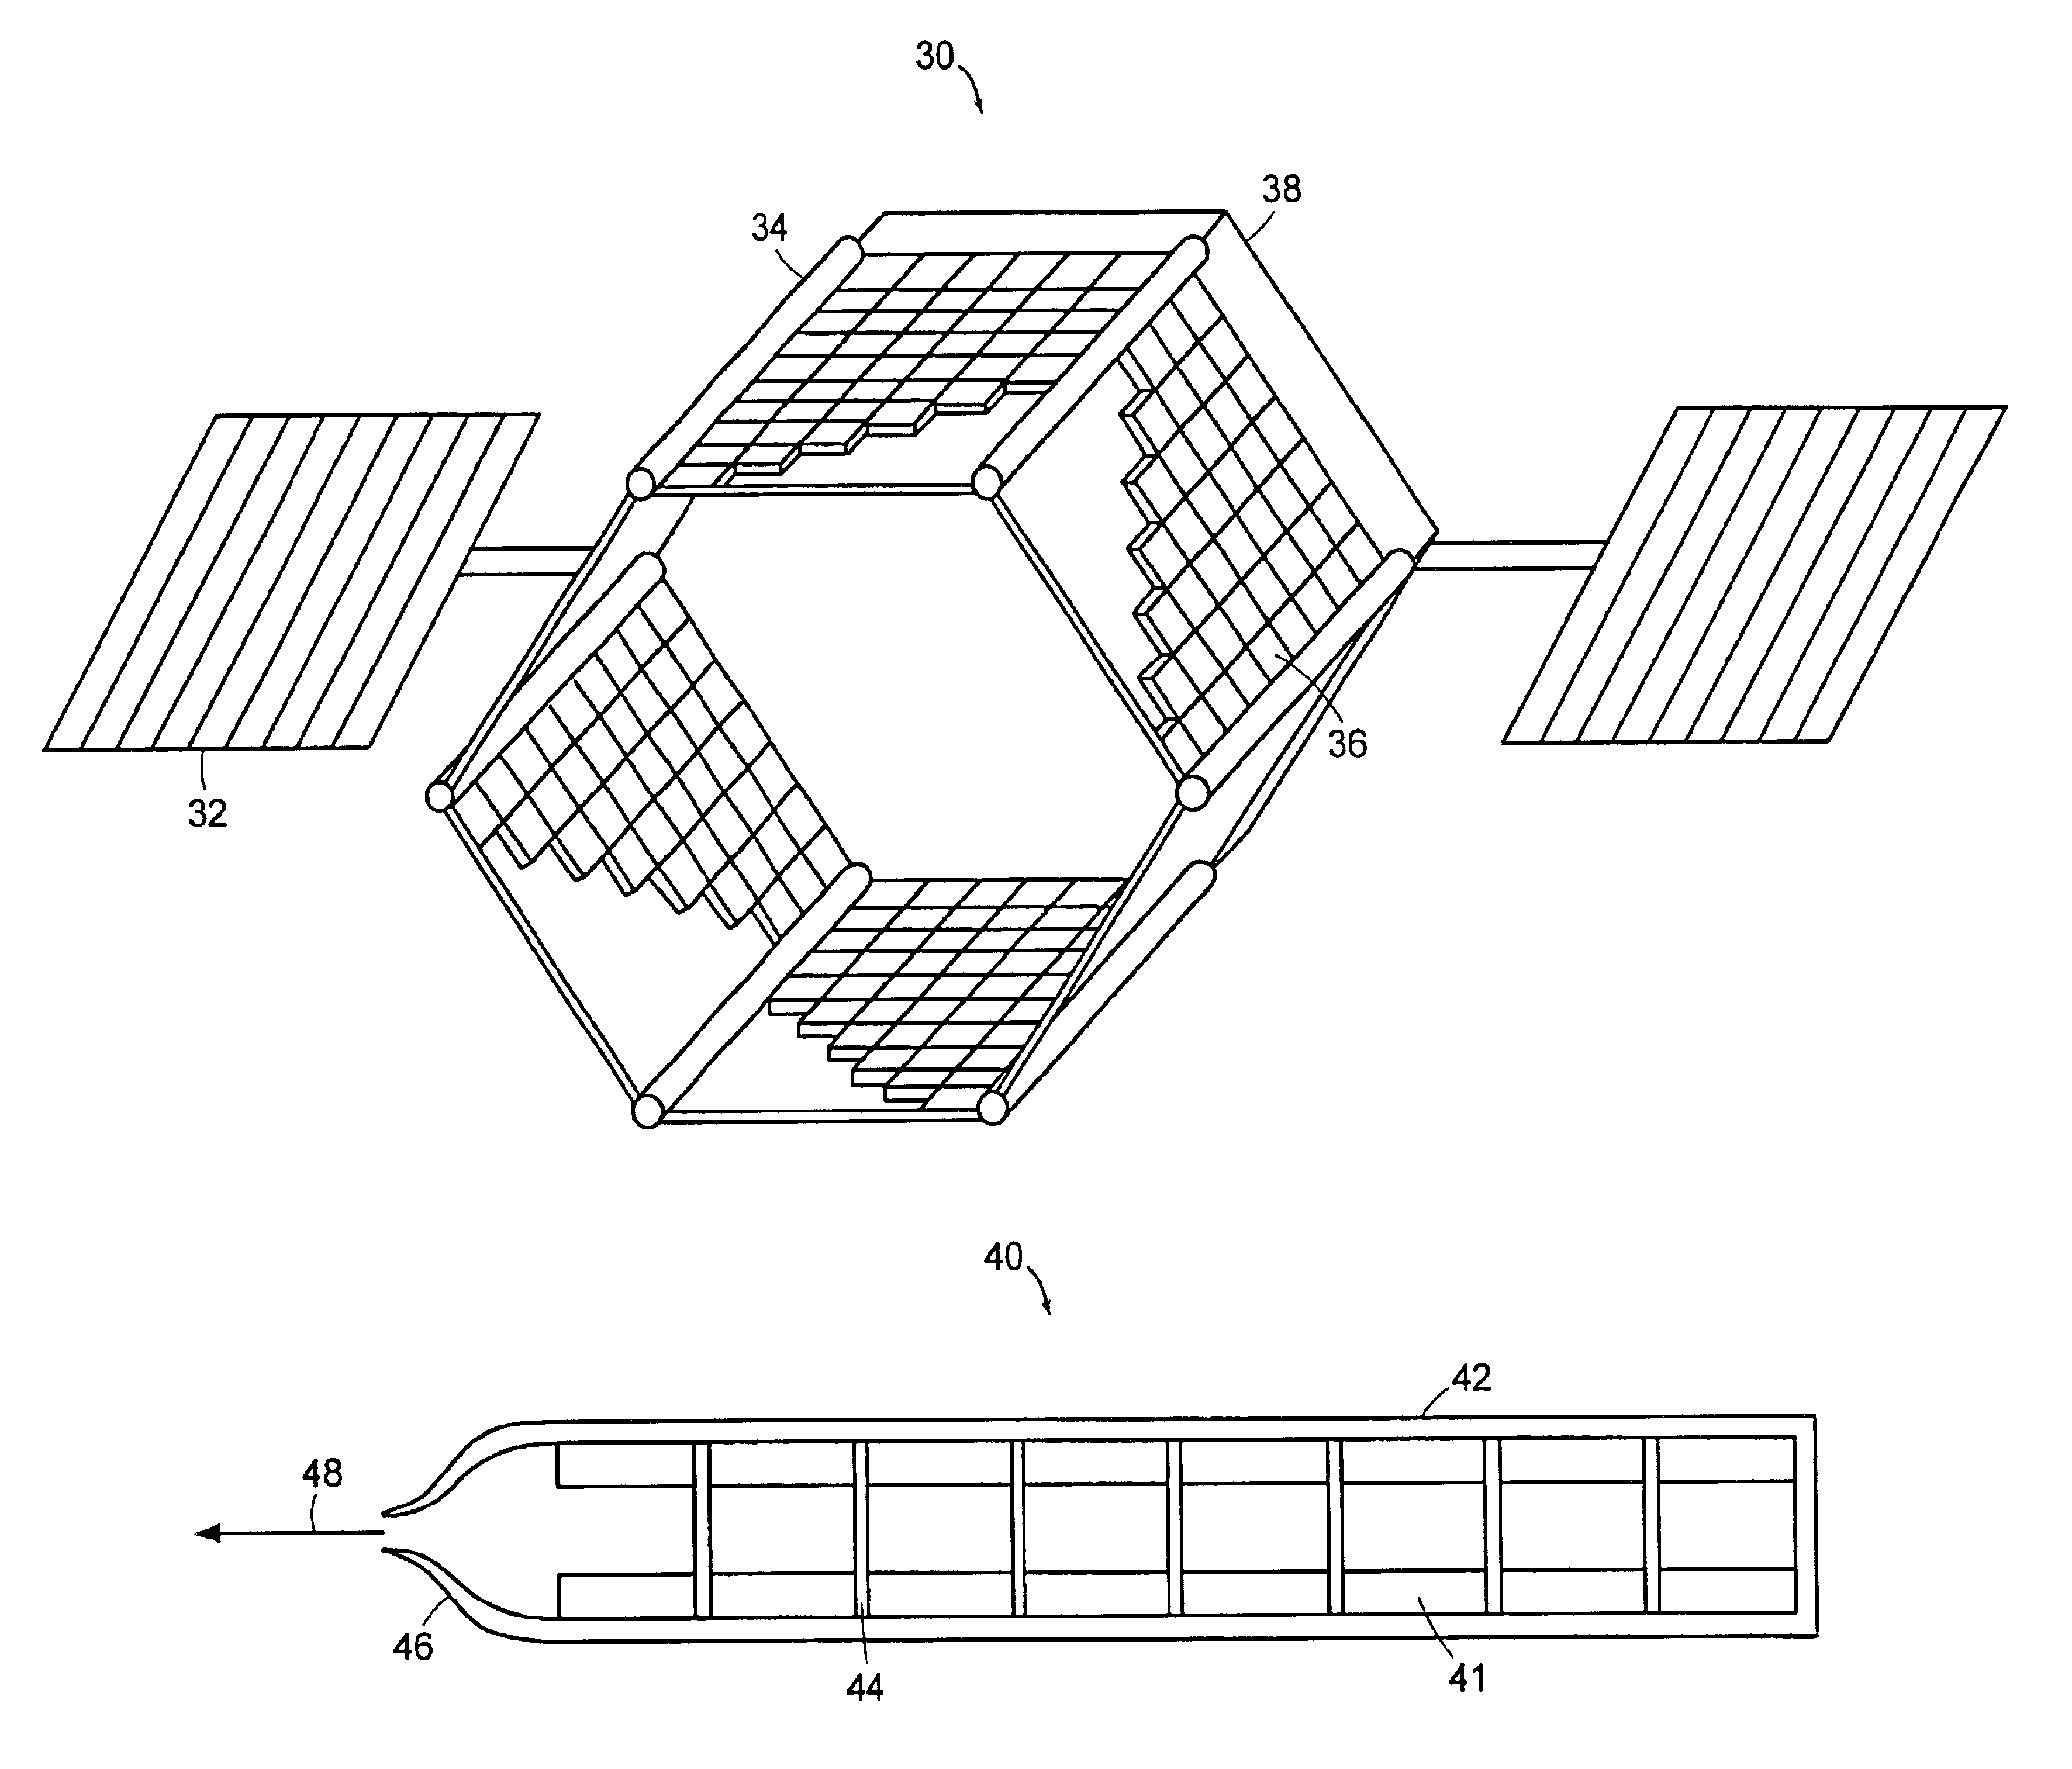 Polyoxymethylene as structural support member and propellant